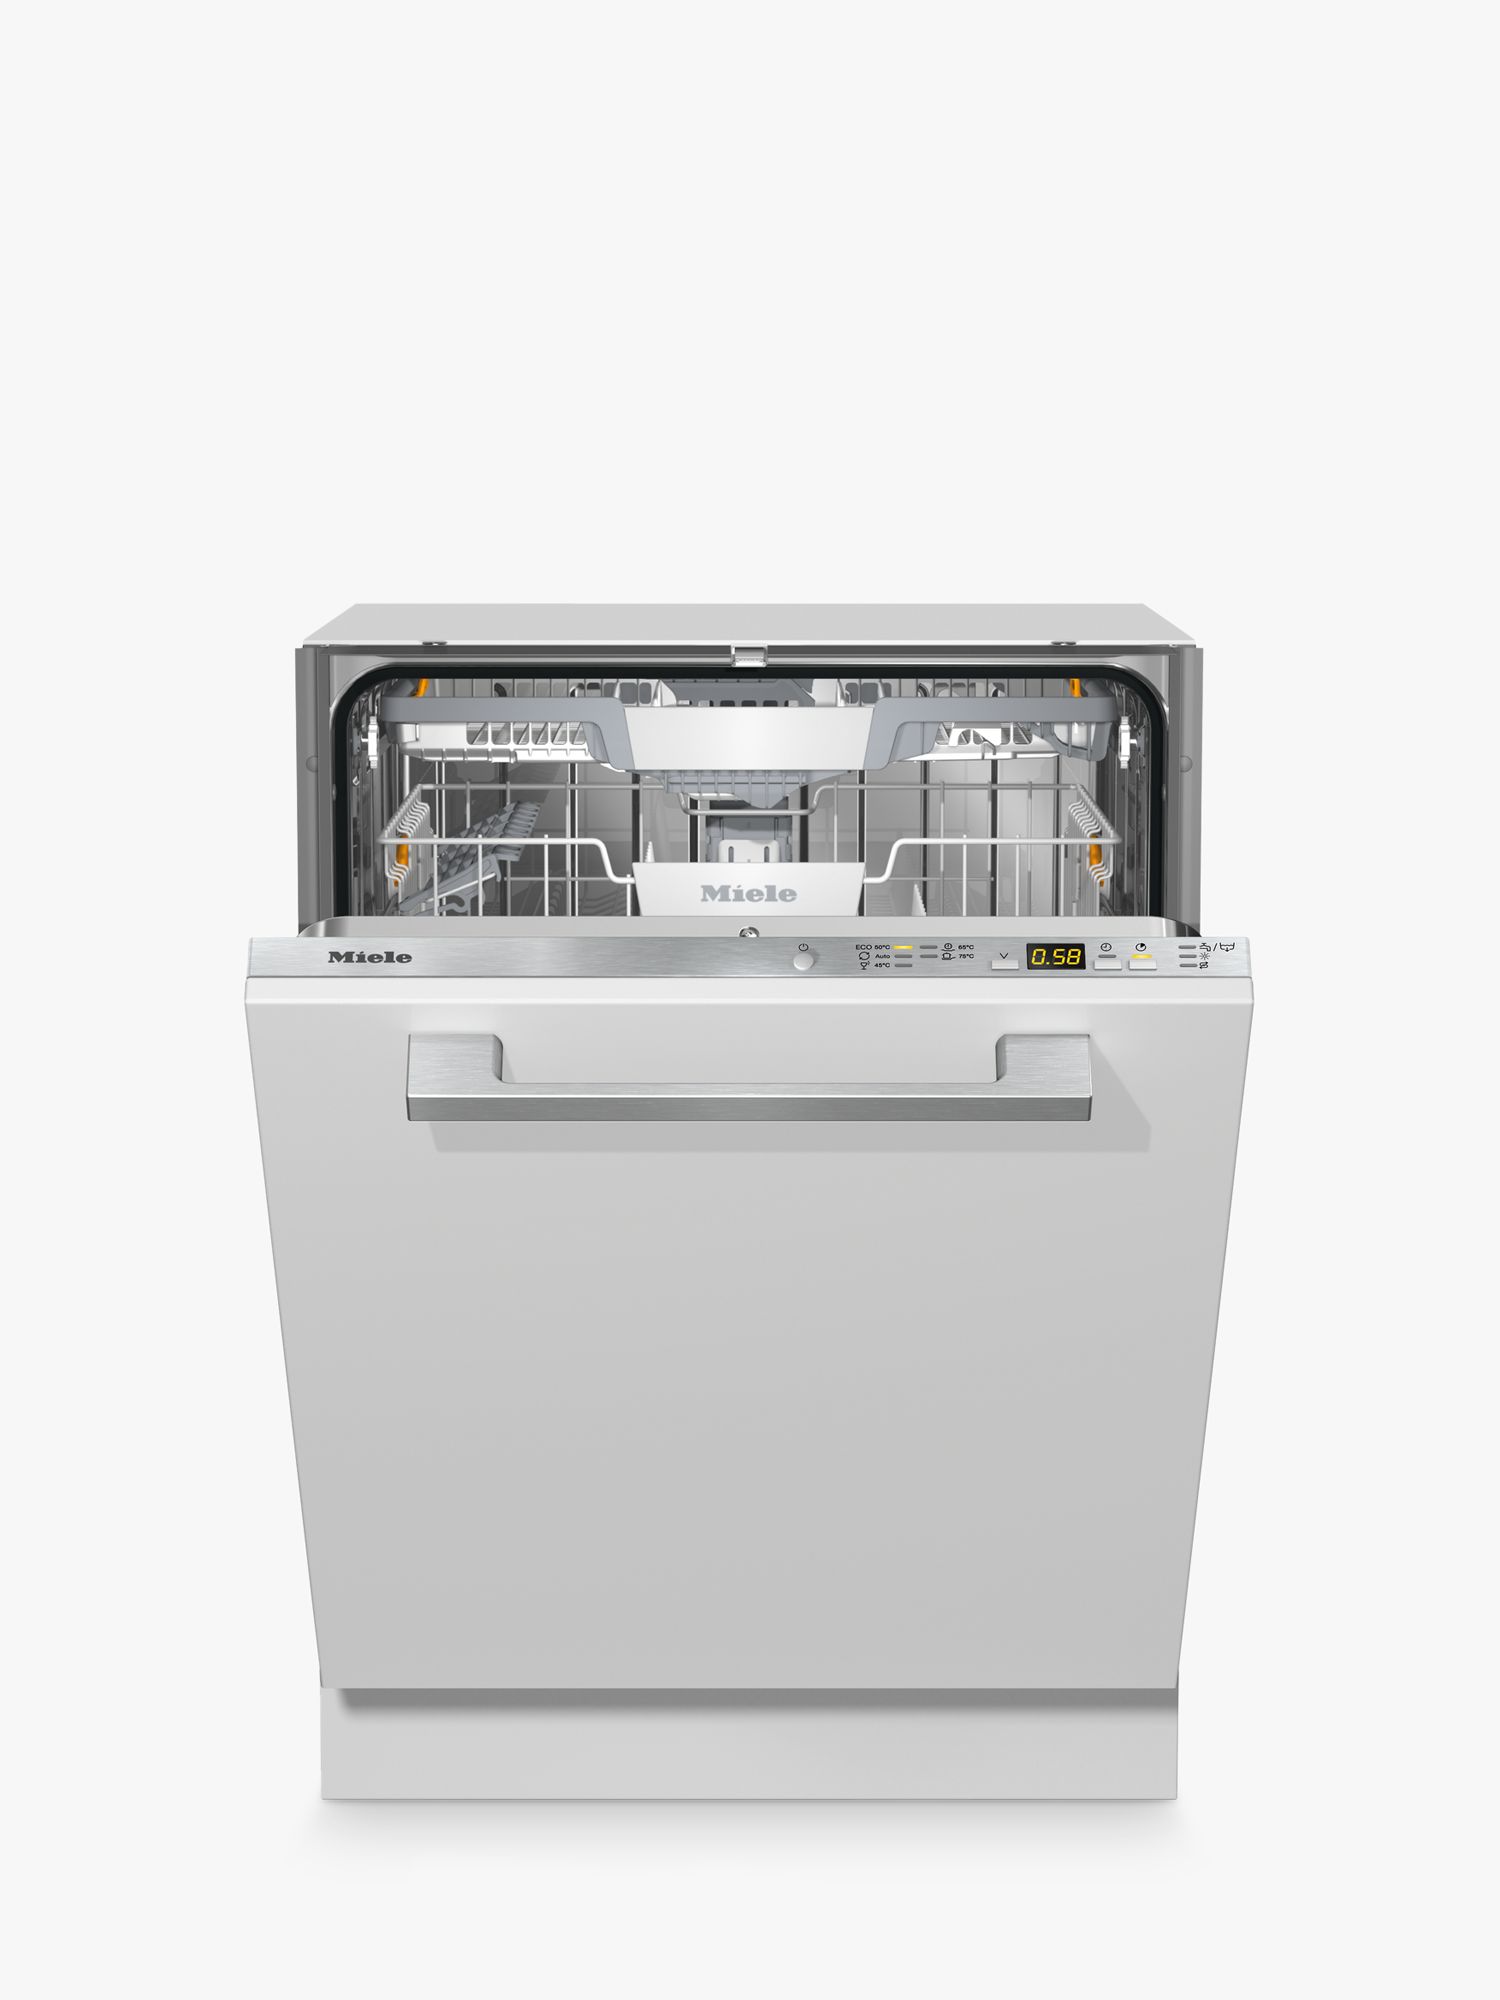 Miele G5260 SCVi Fully Integrated Dishwasher